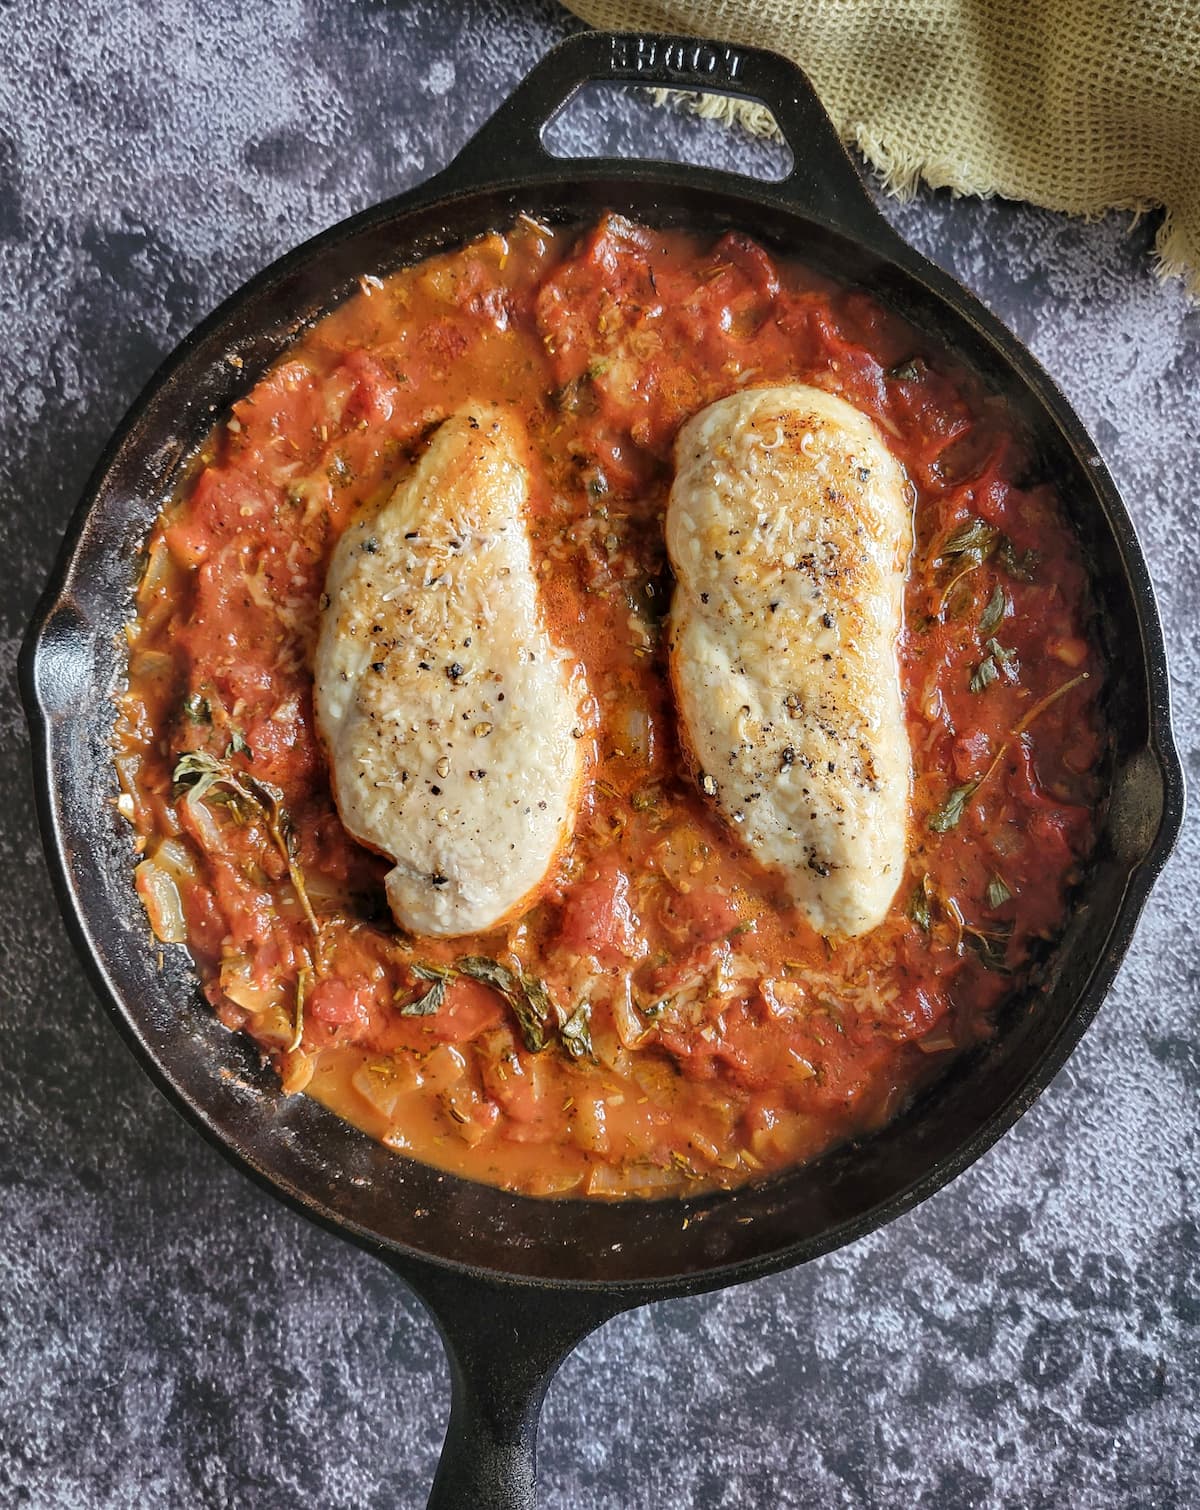 two cooked and seasoned chicken breasts in tomato sauce with herbs in a cast iron skillet